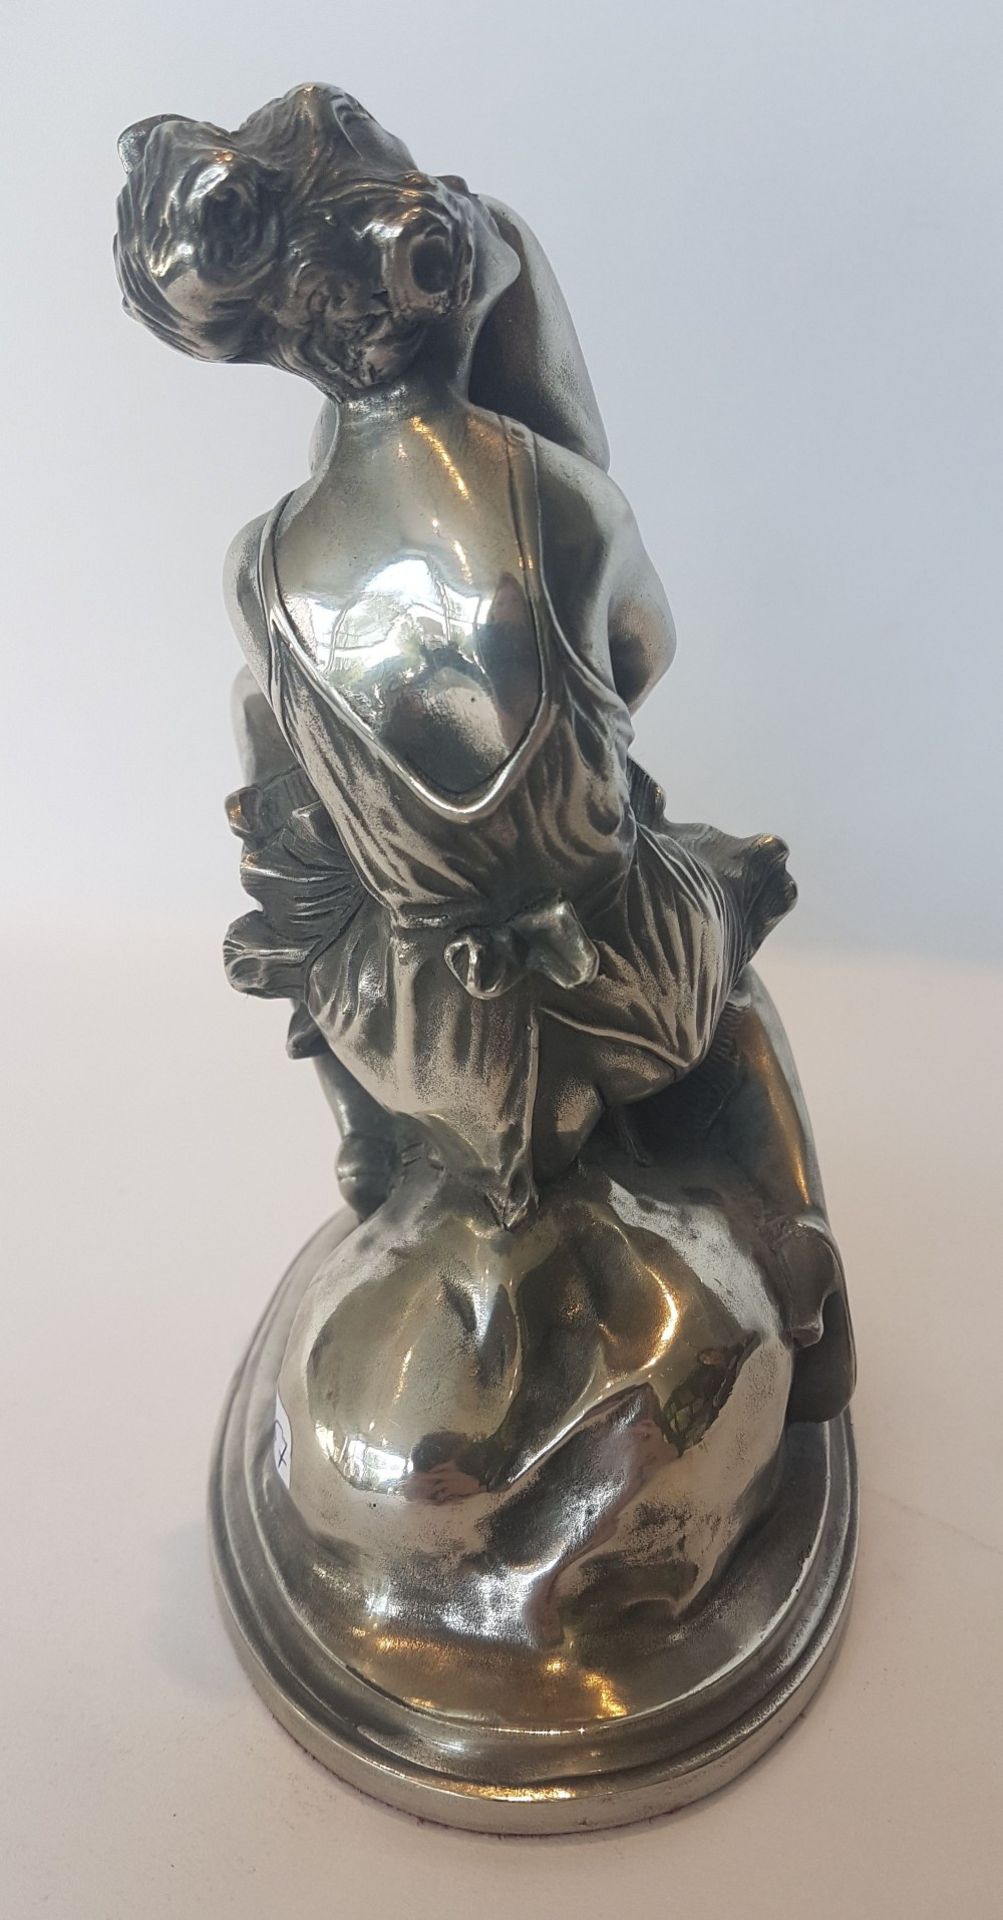 Bruno Zach (1891-1935)The embrace; Silvery metal sculpture. Signed. 16 x 13 x 8 cm - Image 5 of 5